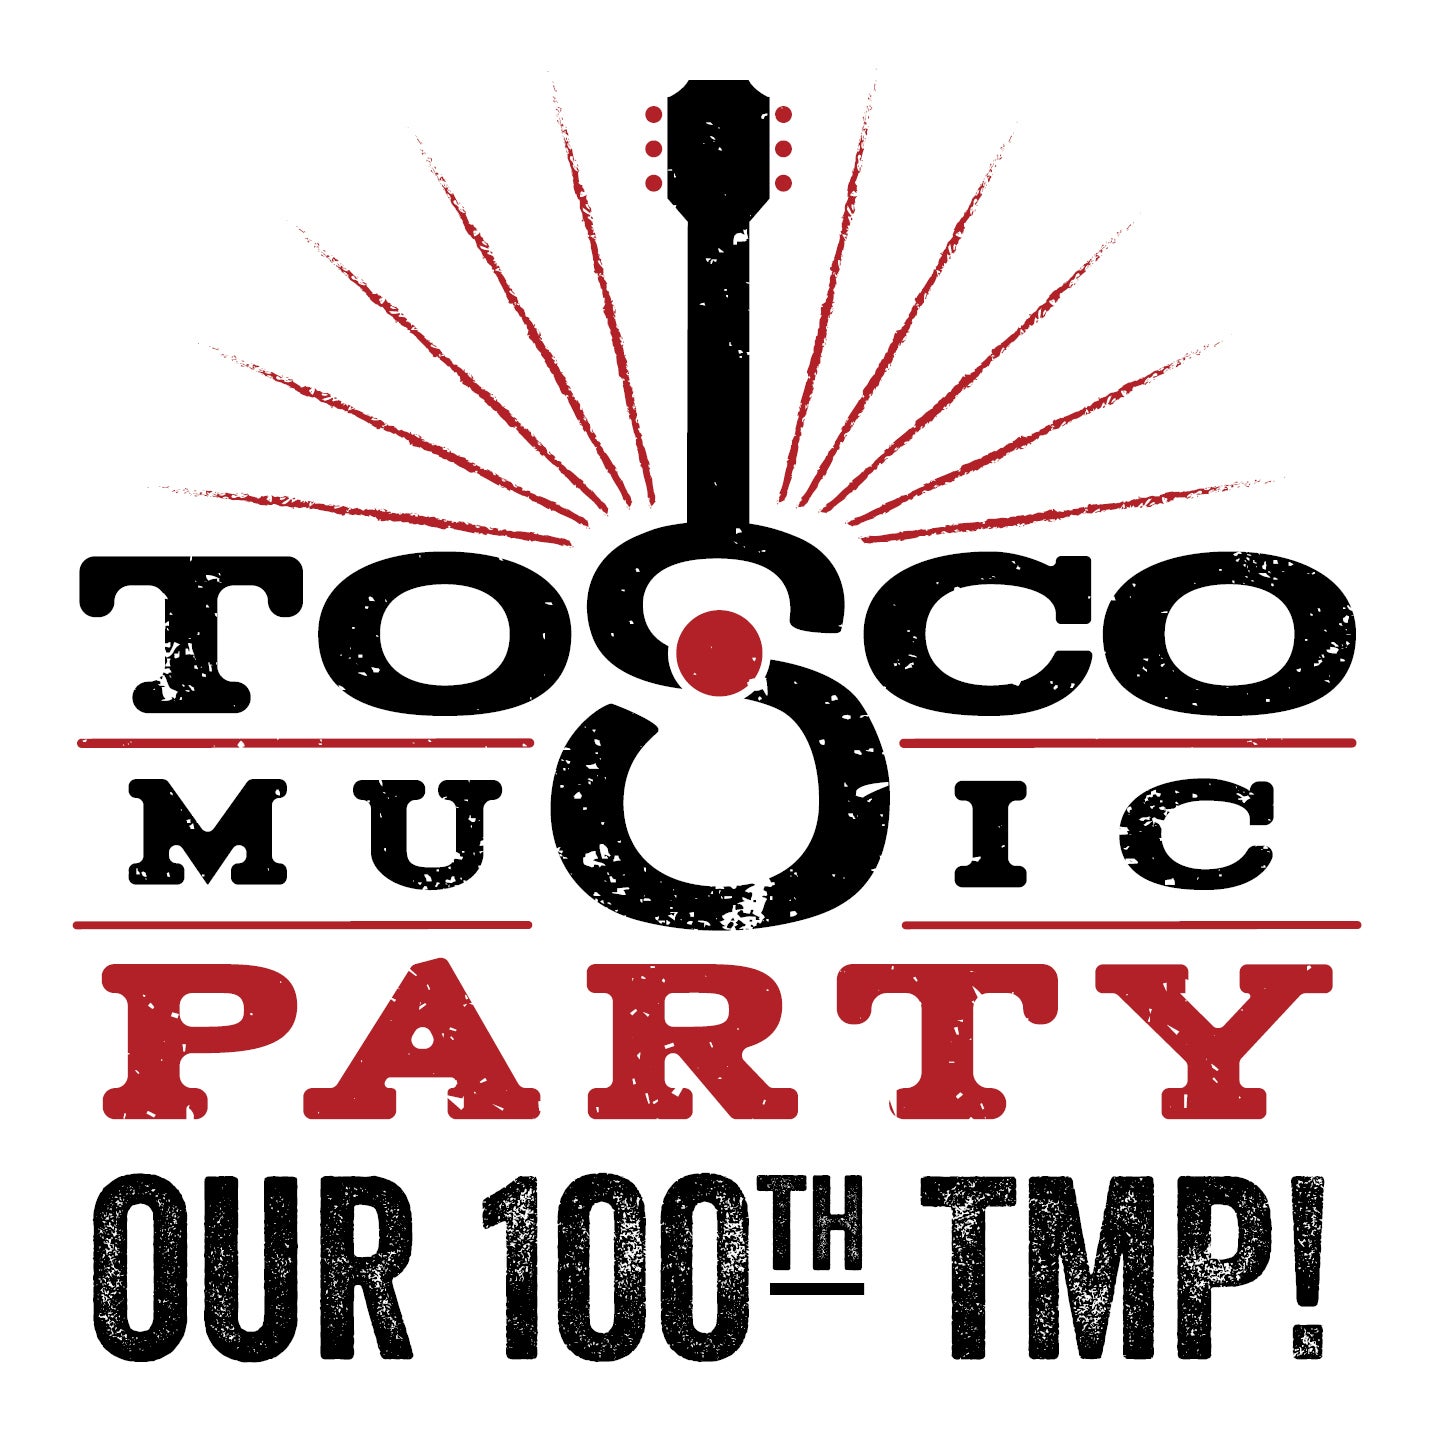 Tosco Music Party